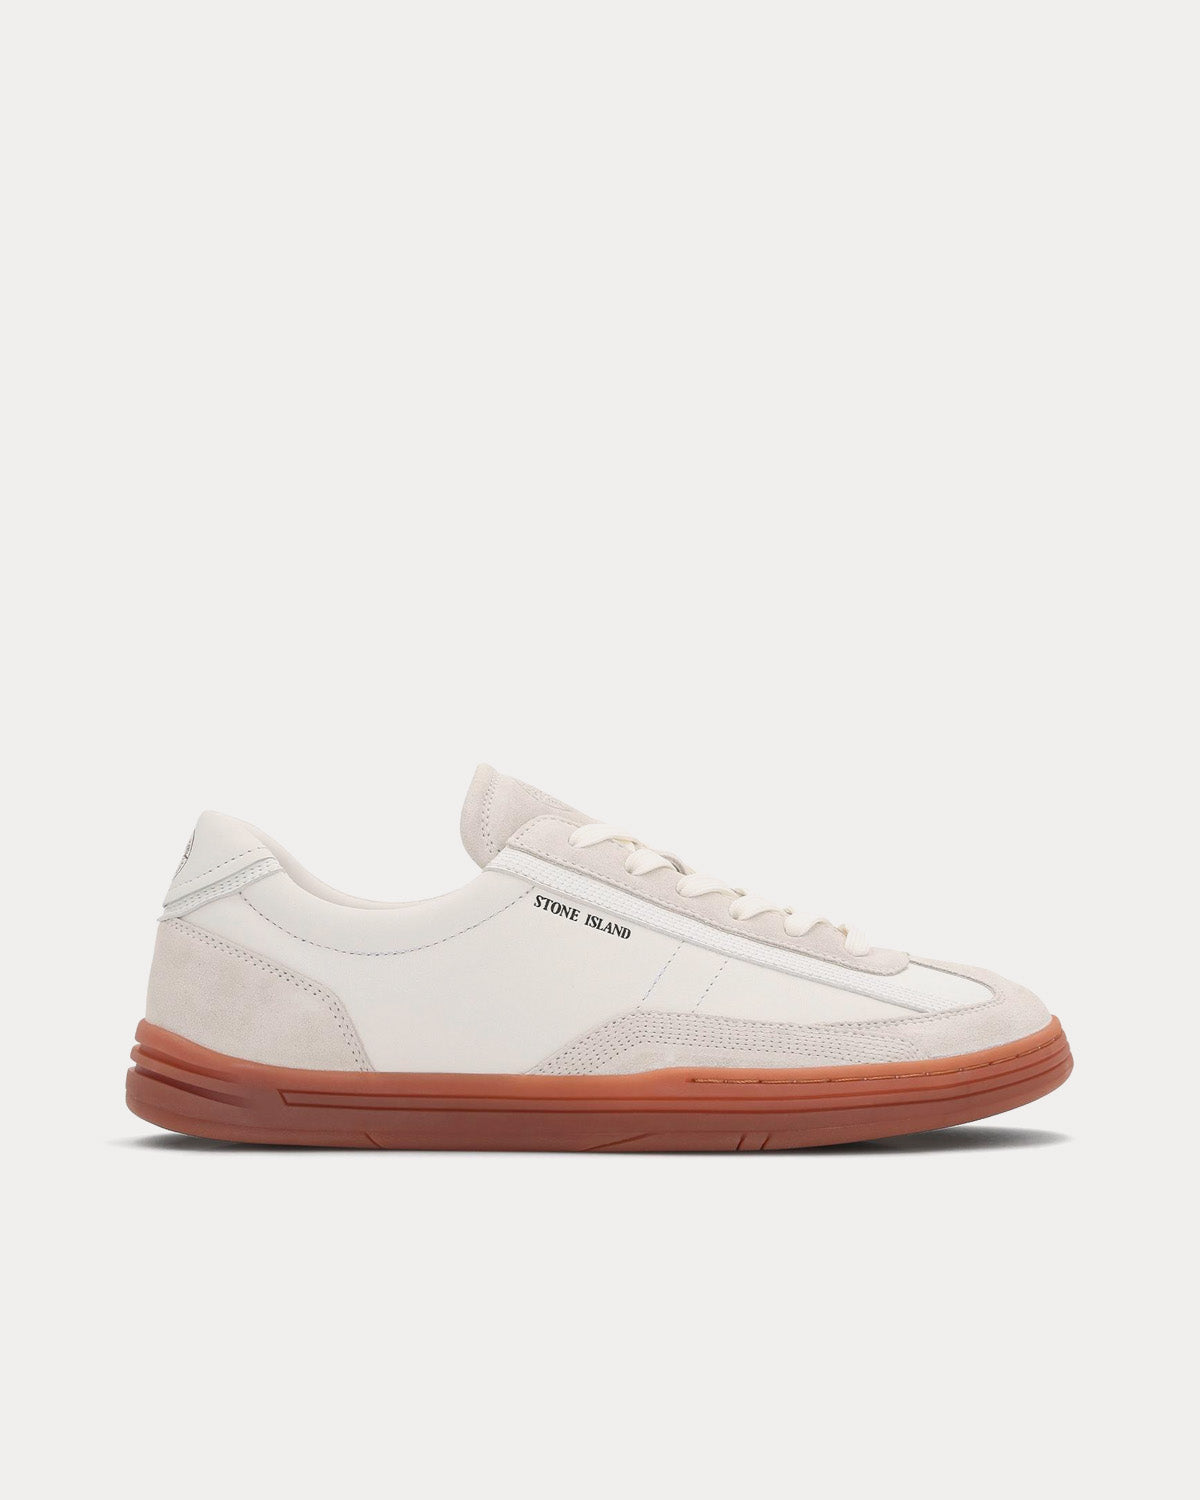 Stone Island - S0301 White Low Top Sneakers